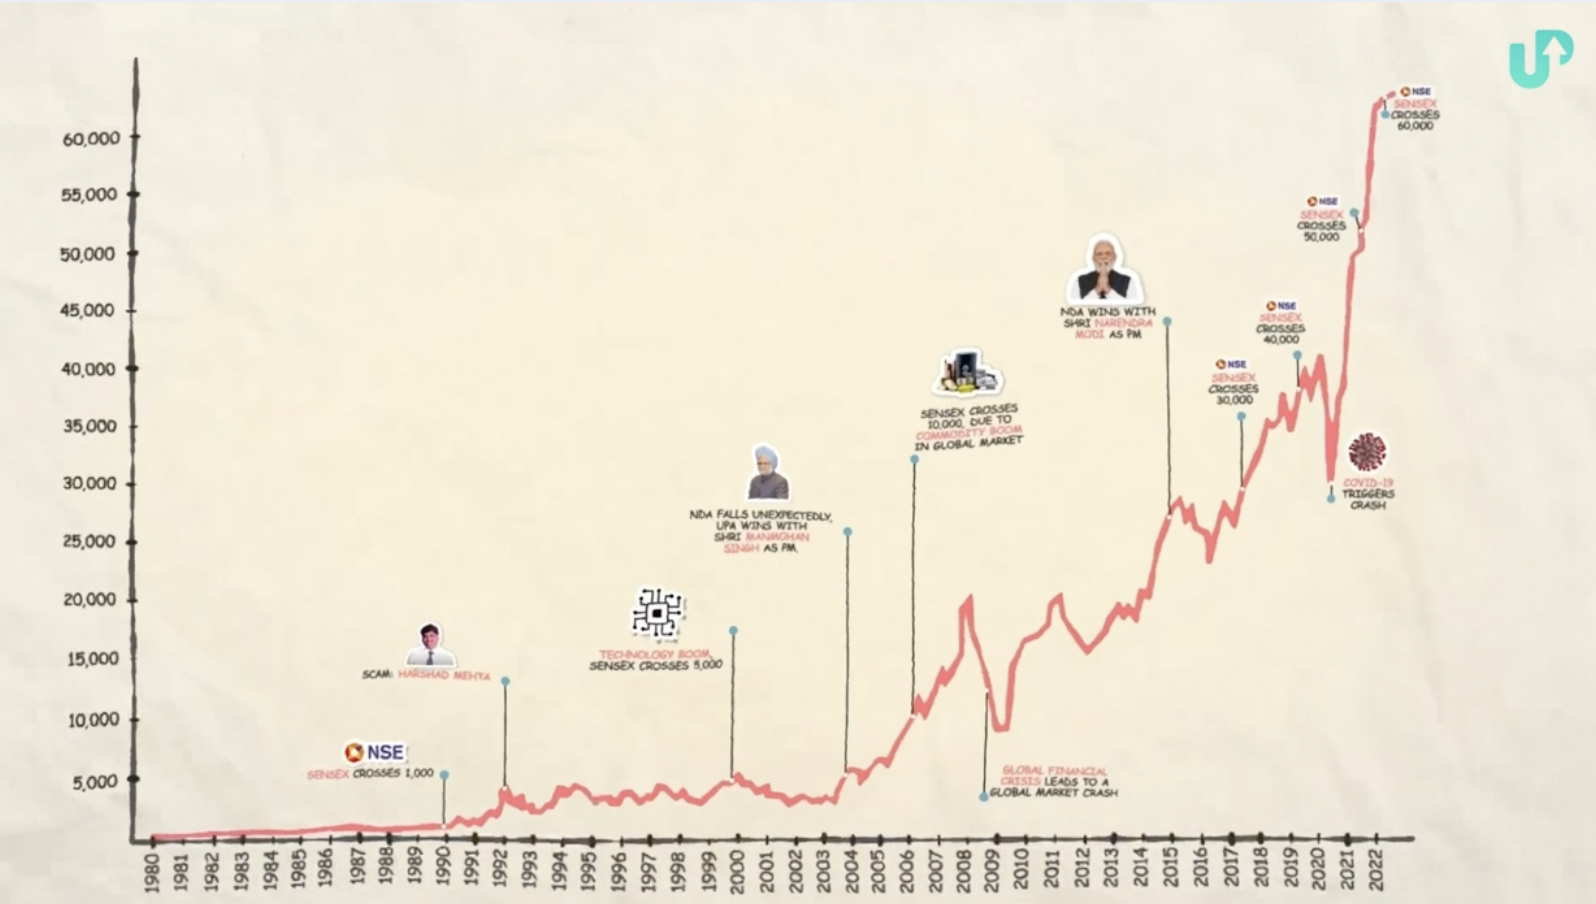 Journey of stock market represented by Sensex throughout the years